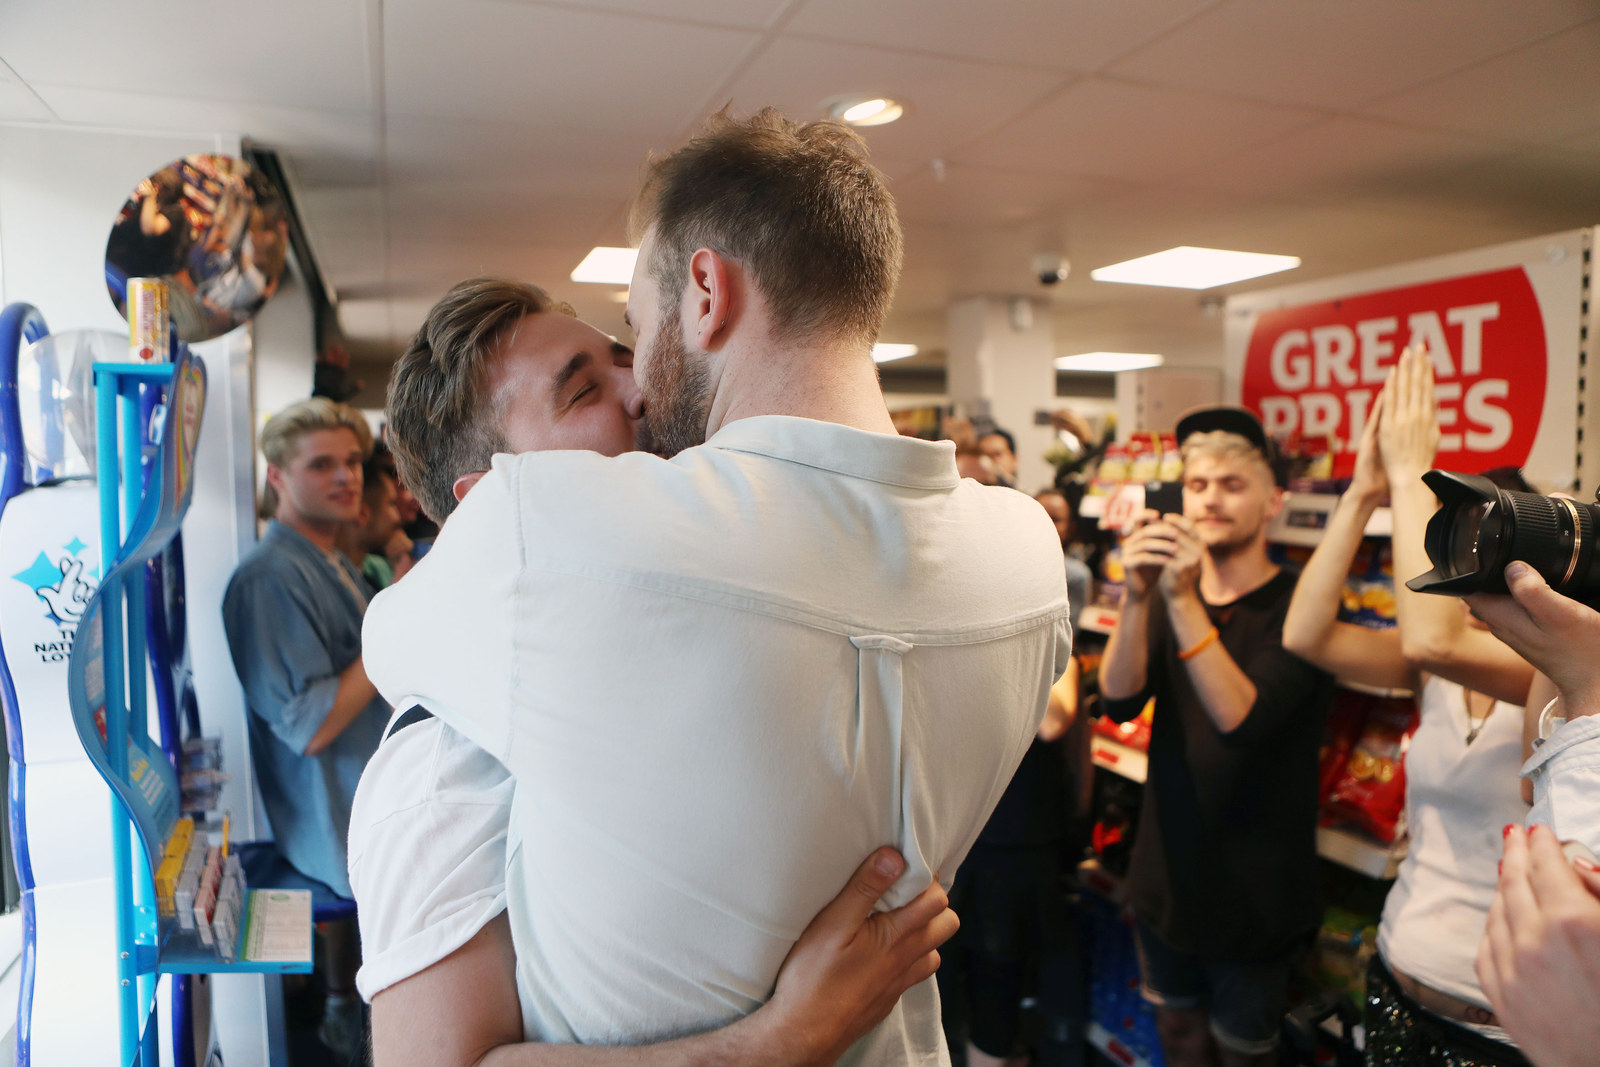 Same Sex Couples Held A Big Gay Kiss In Protest At A Supermarket